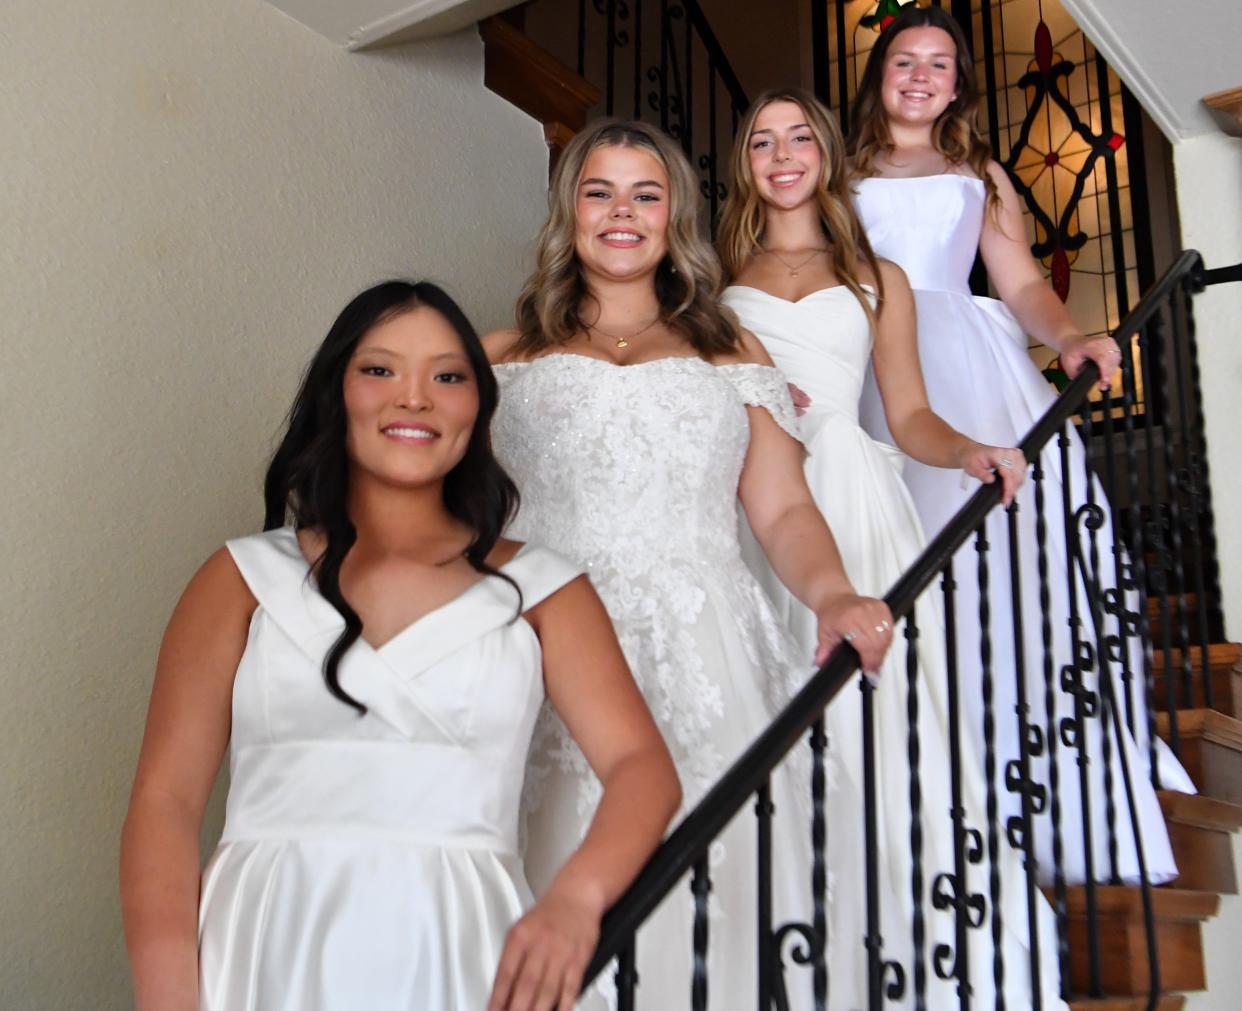 These Junior Forum debutantes shown here at The Forum are, top to bottom, Carson Lipscomb, Lauren Lozipone, Presley Montz and Sydney Mulhare.